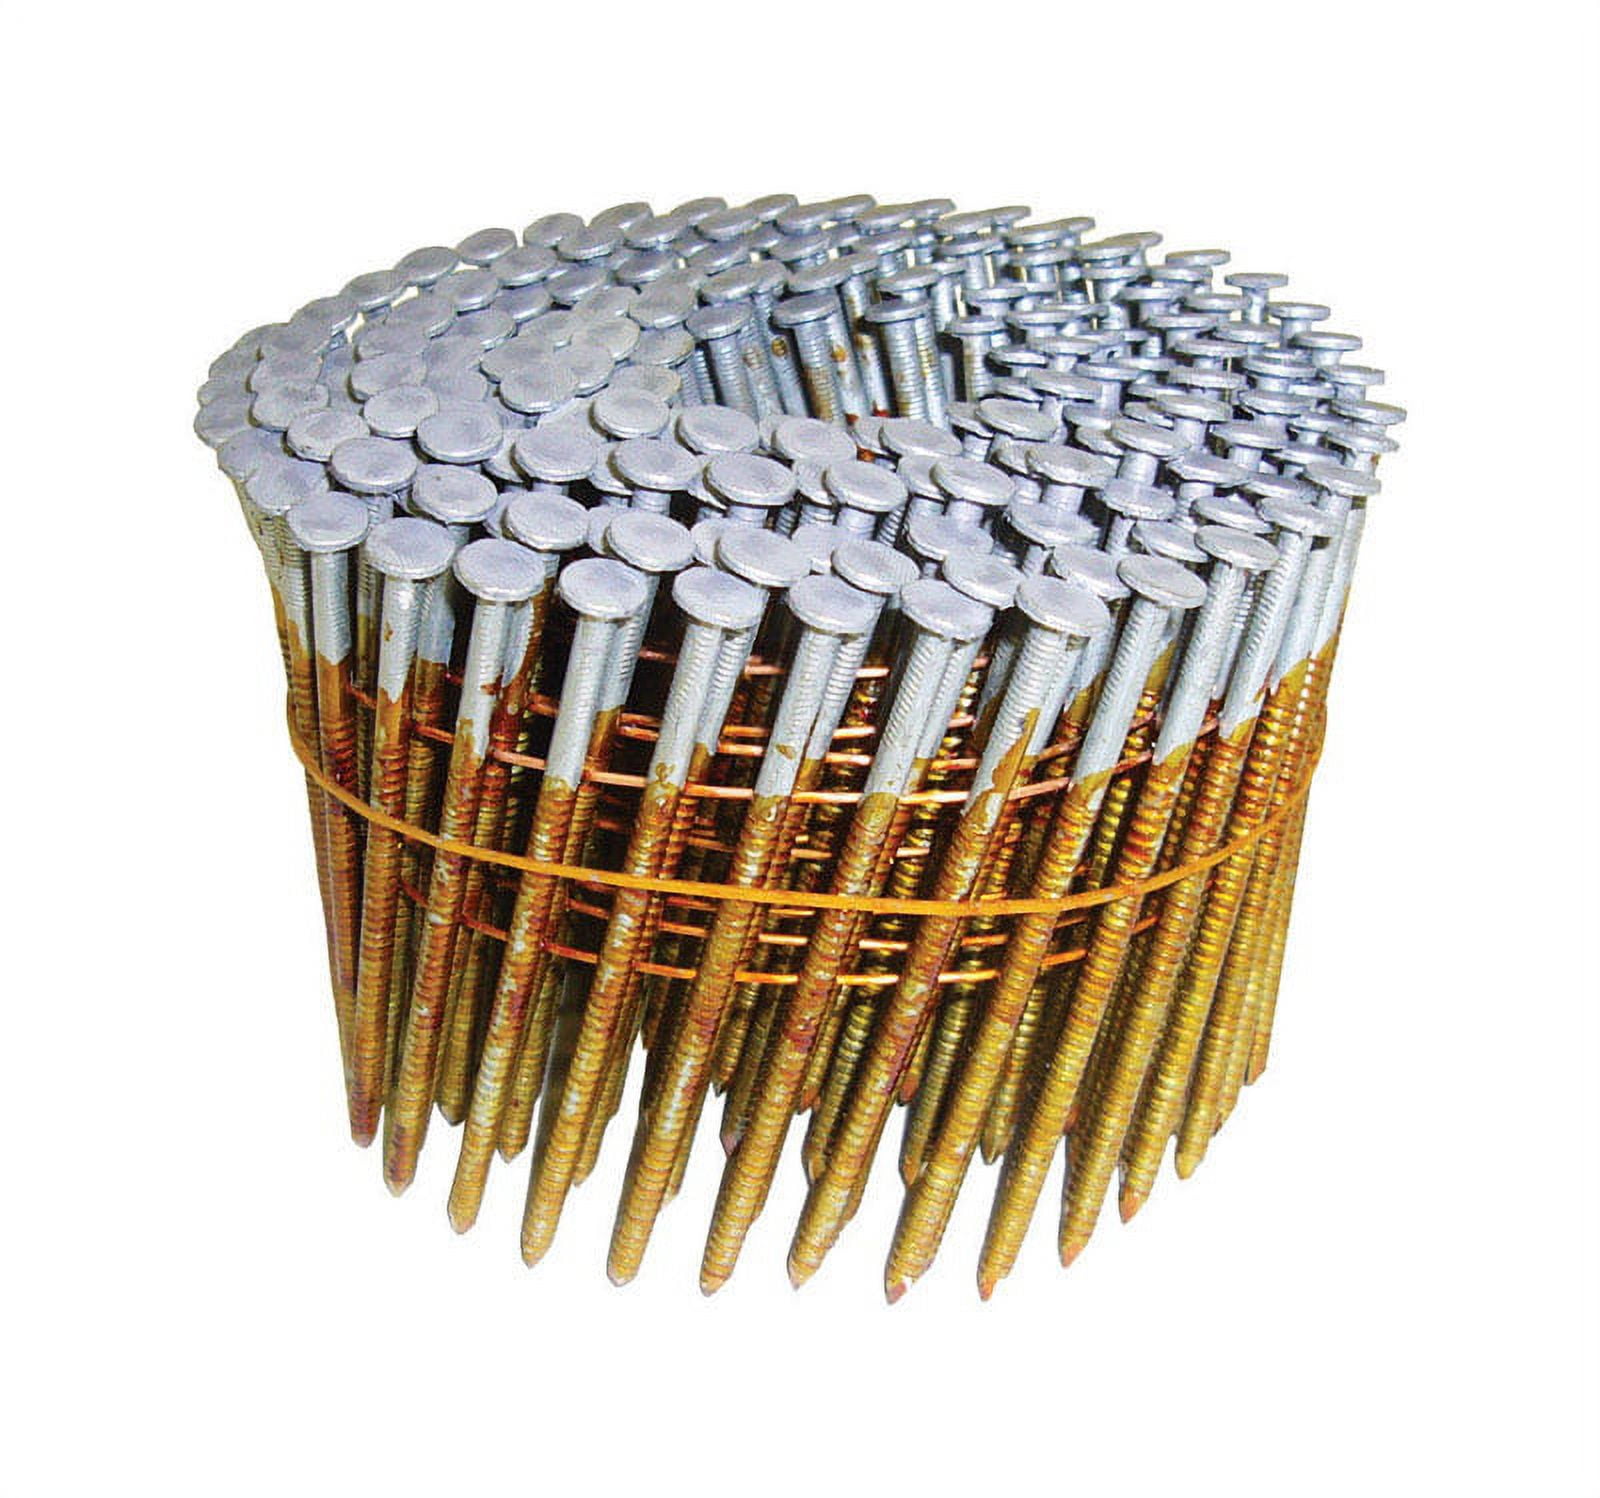 2799765 3 x 0.12 in. Dia. 16 deg 16 Gauge Smooth Shank Angled Coil Framing Nails, Pack of 4000 -  Hitachi